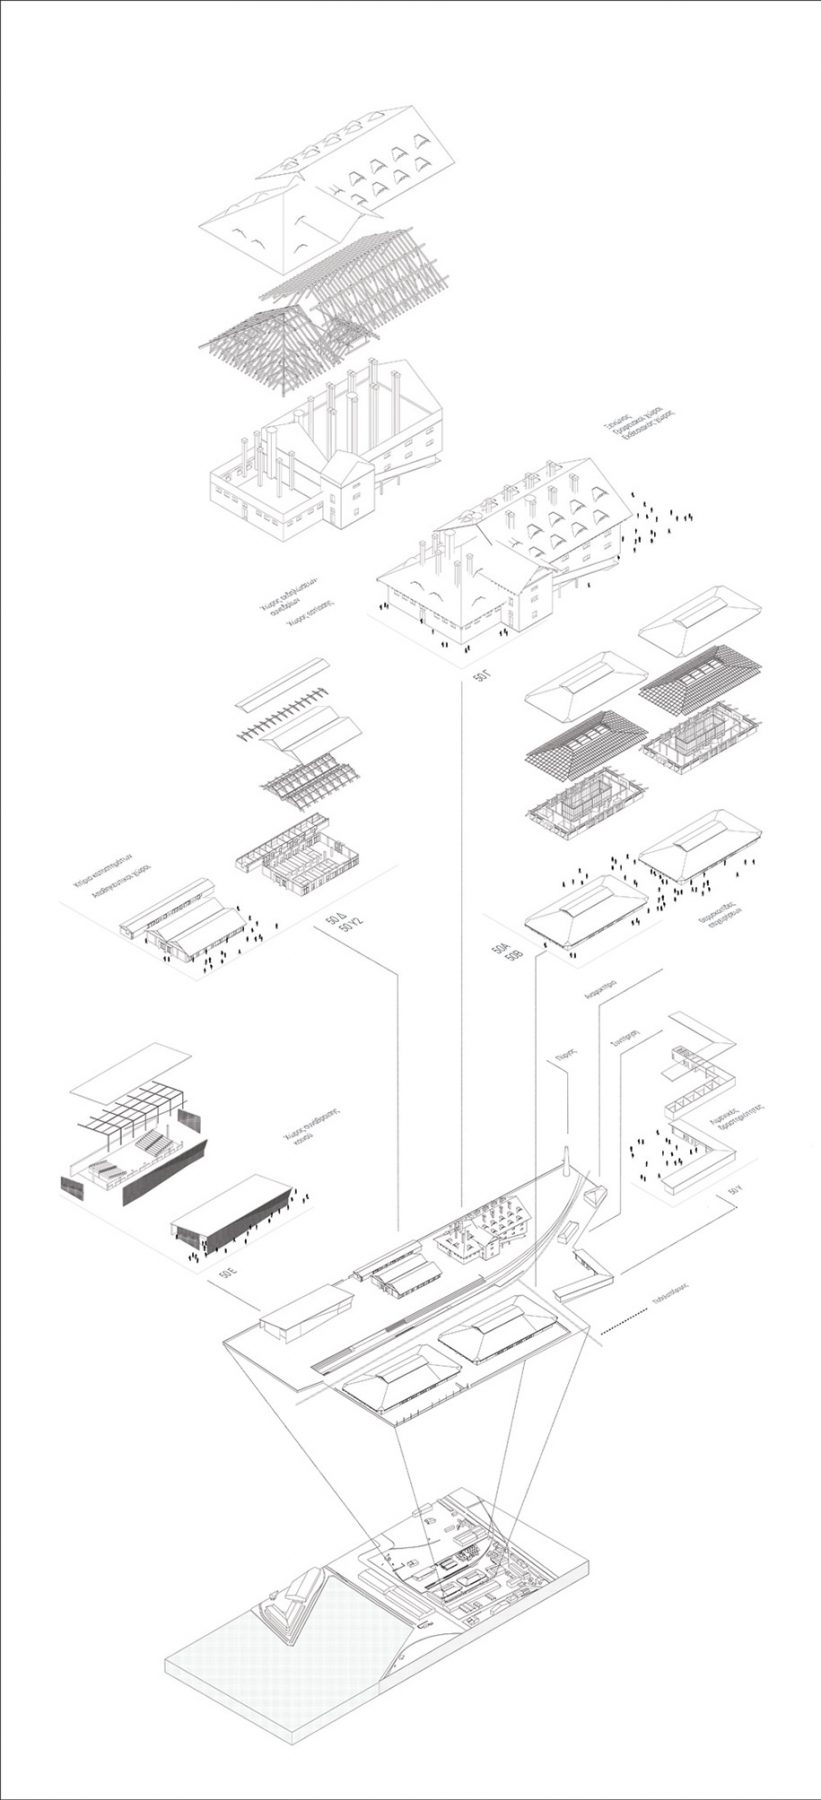 Upcycle, Lapides, Lateres, Prize, Reuse, stables, Port, Thessaloniki, Competition, TTDZ Architects & Partners, Exploded, Axonometric View